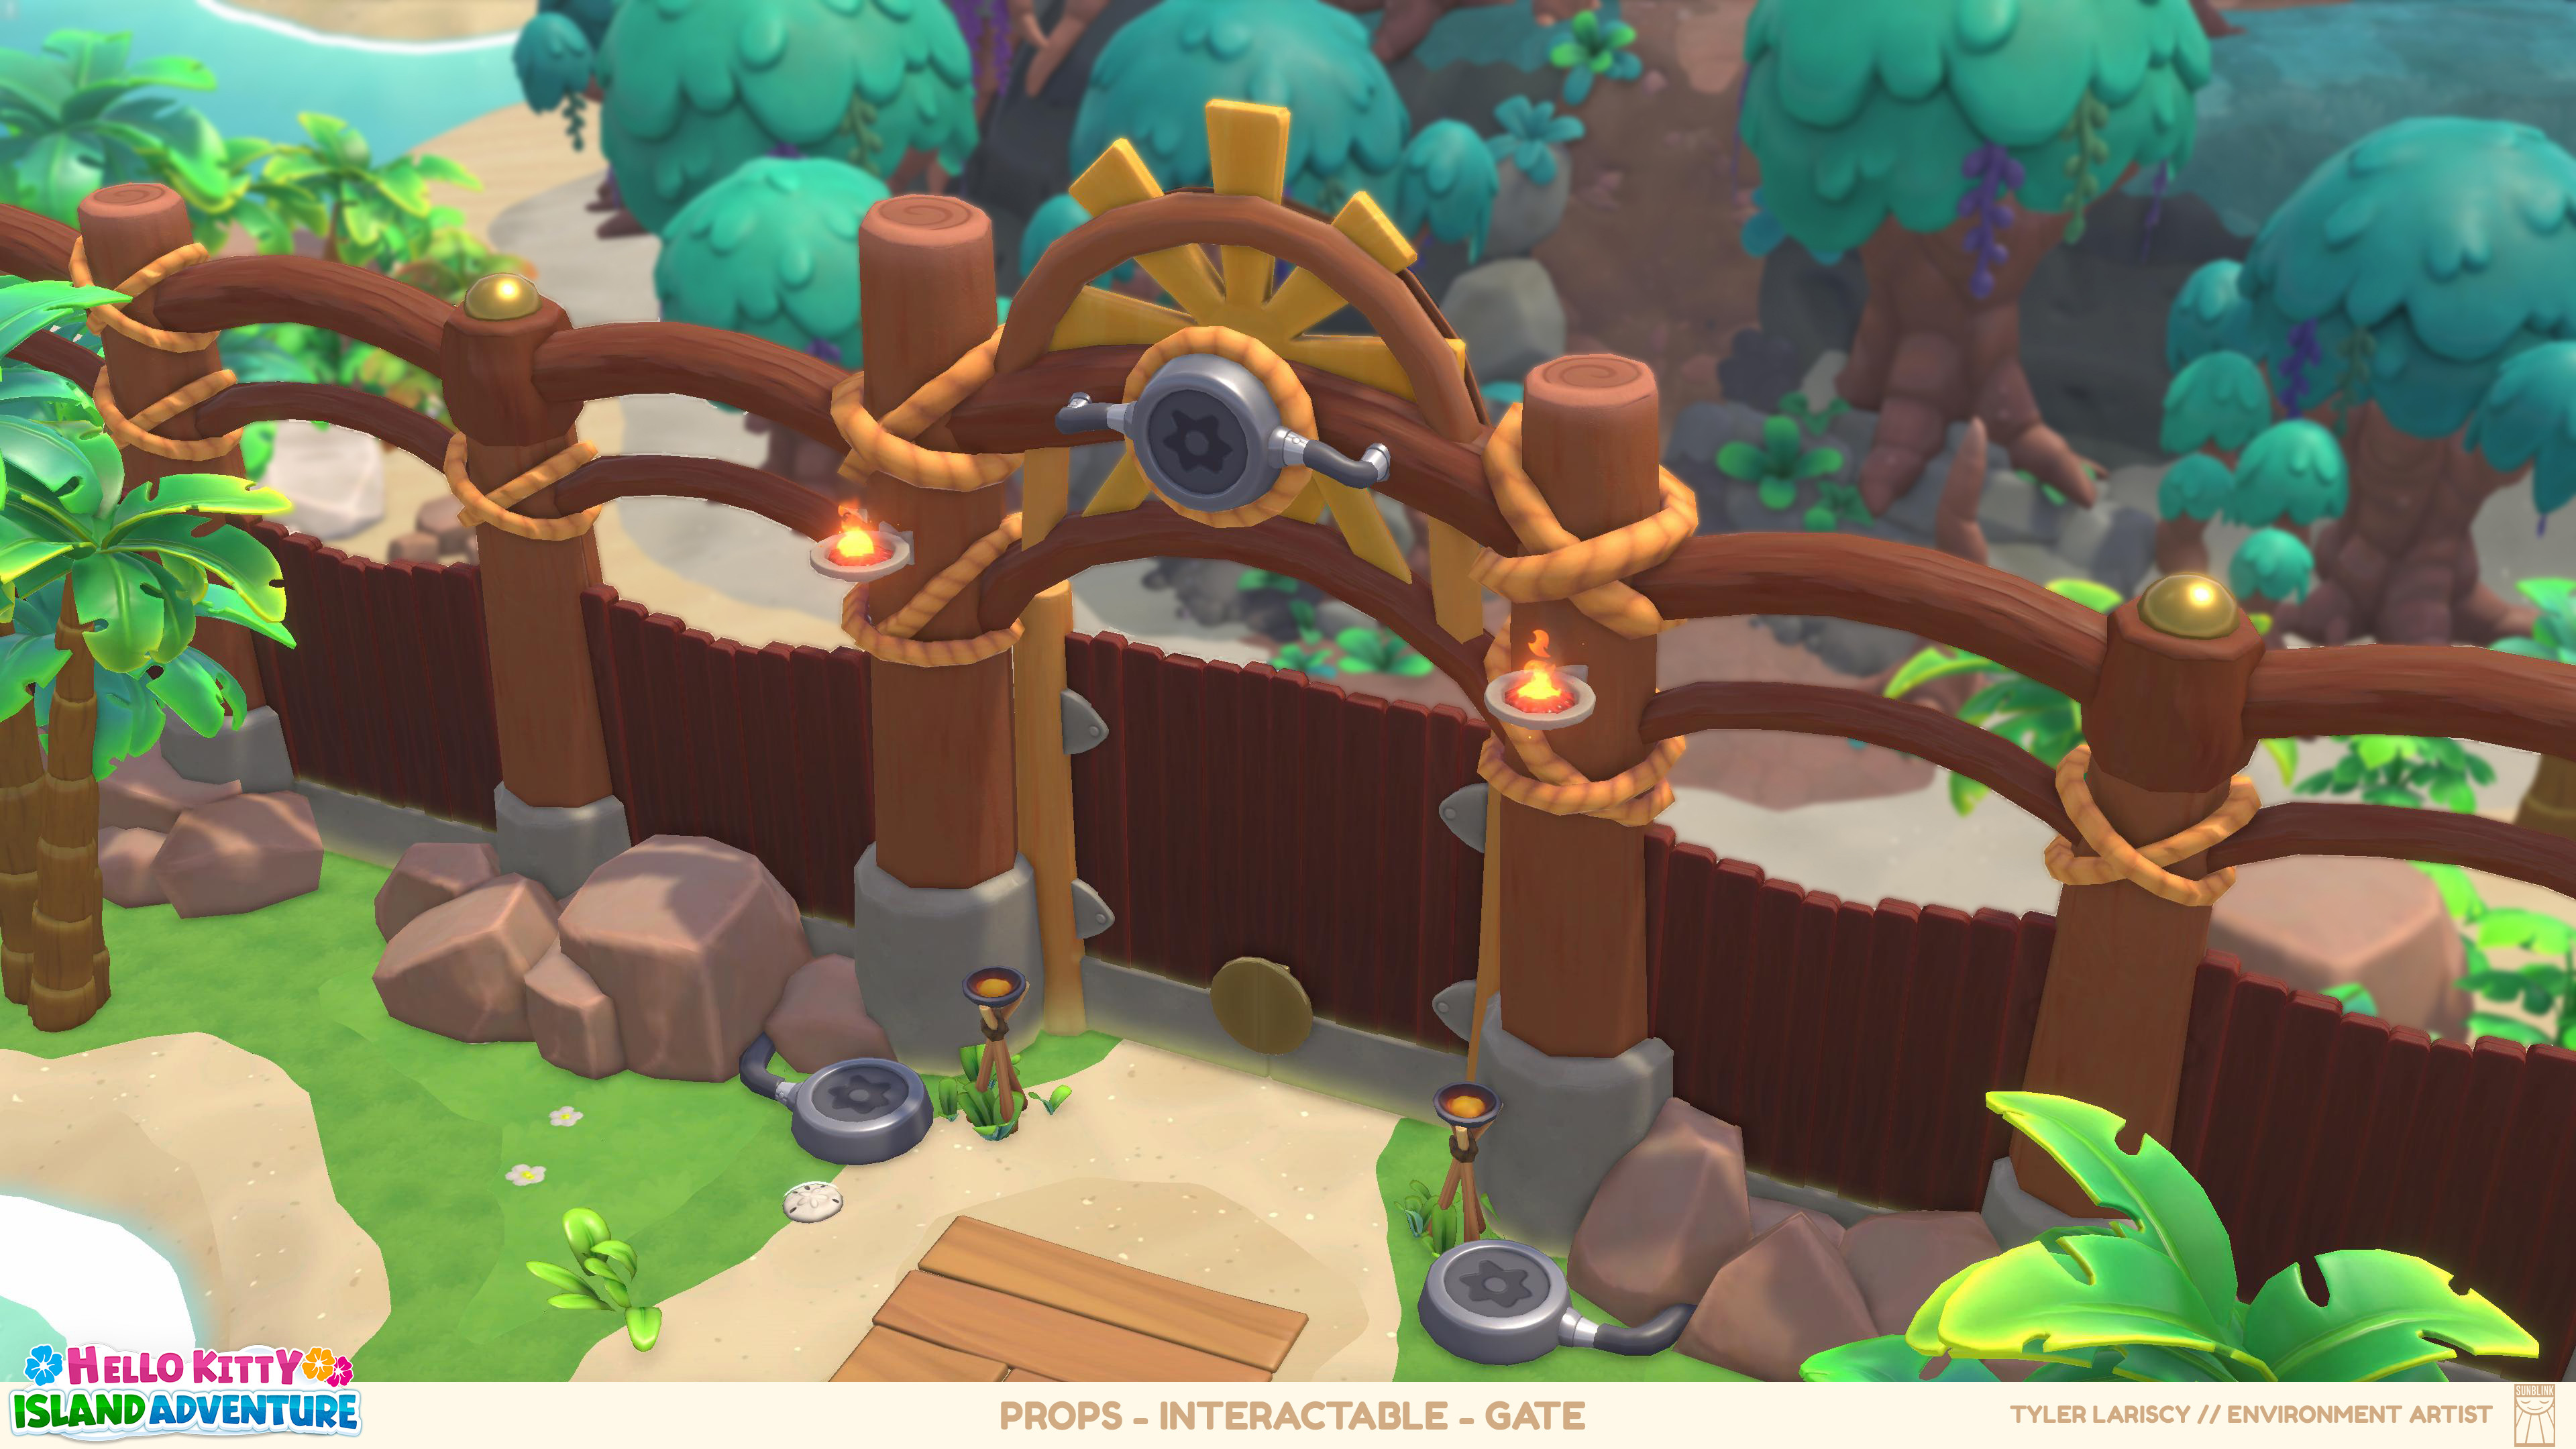 A large gate and wall set that keeps the player from exploring the rest of the game until they unlock it.